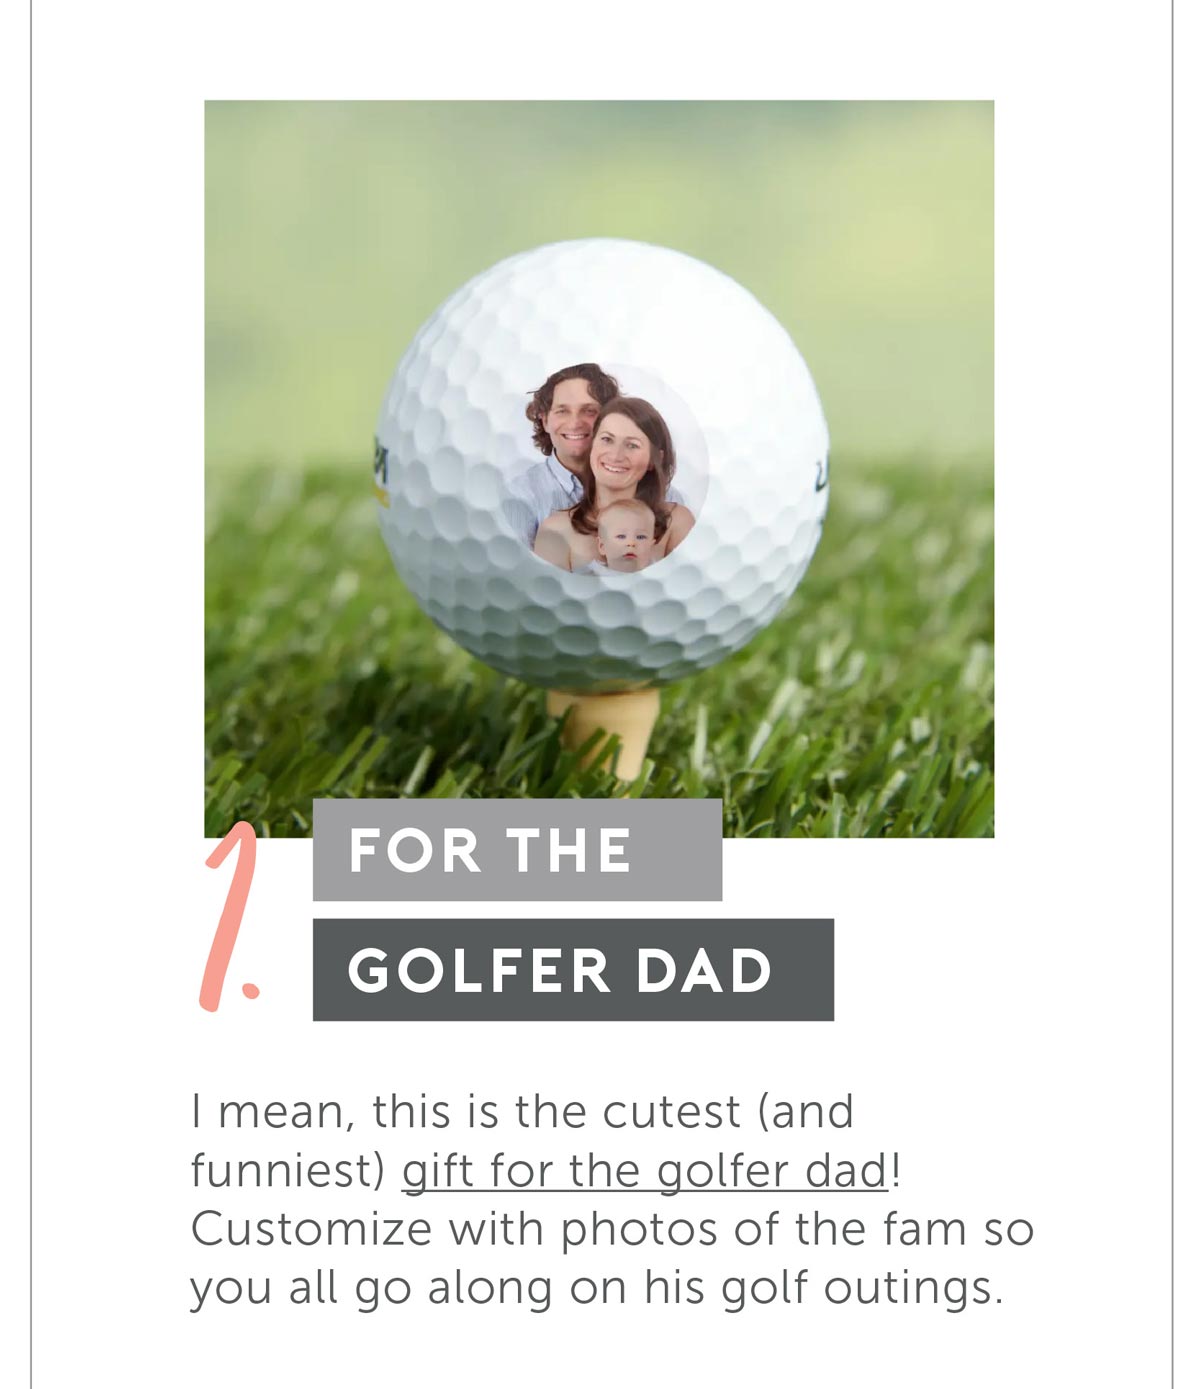 For the golfer dad. For The Golfer Dad.